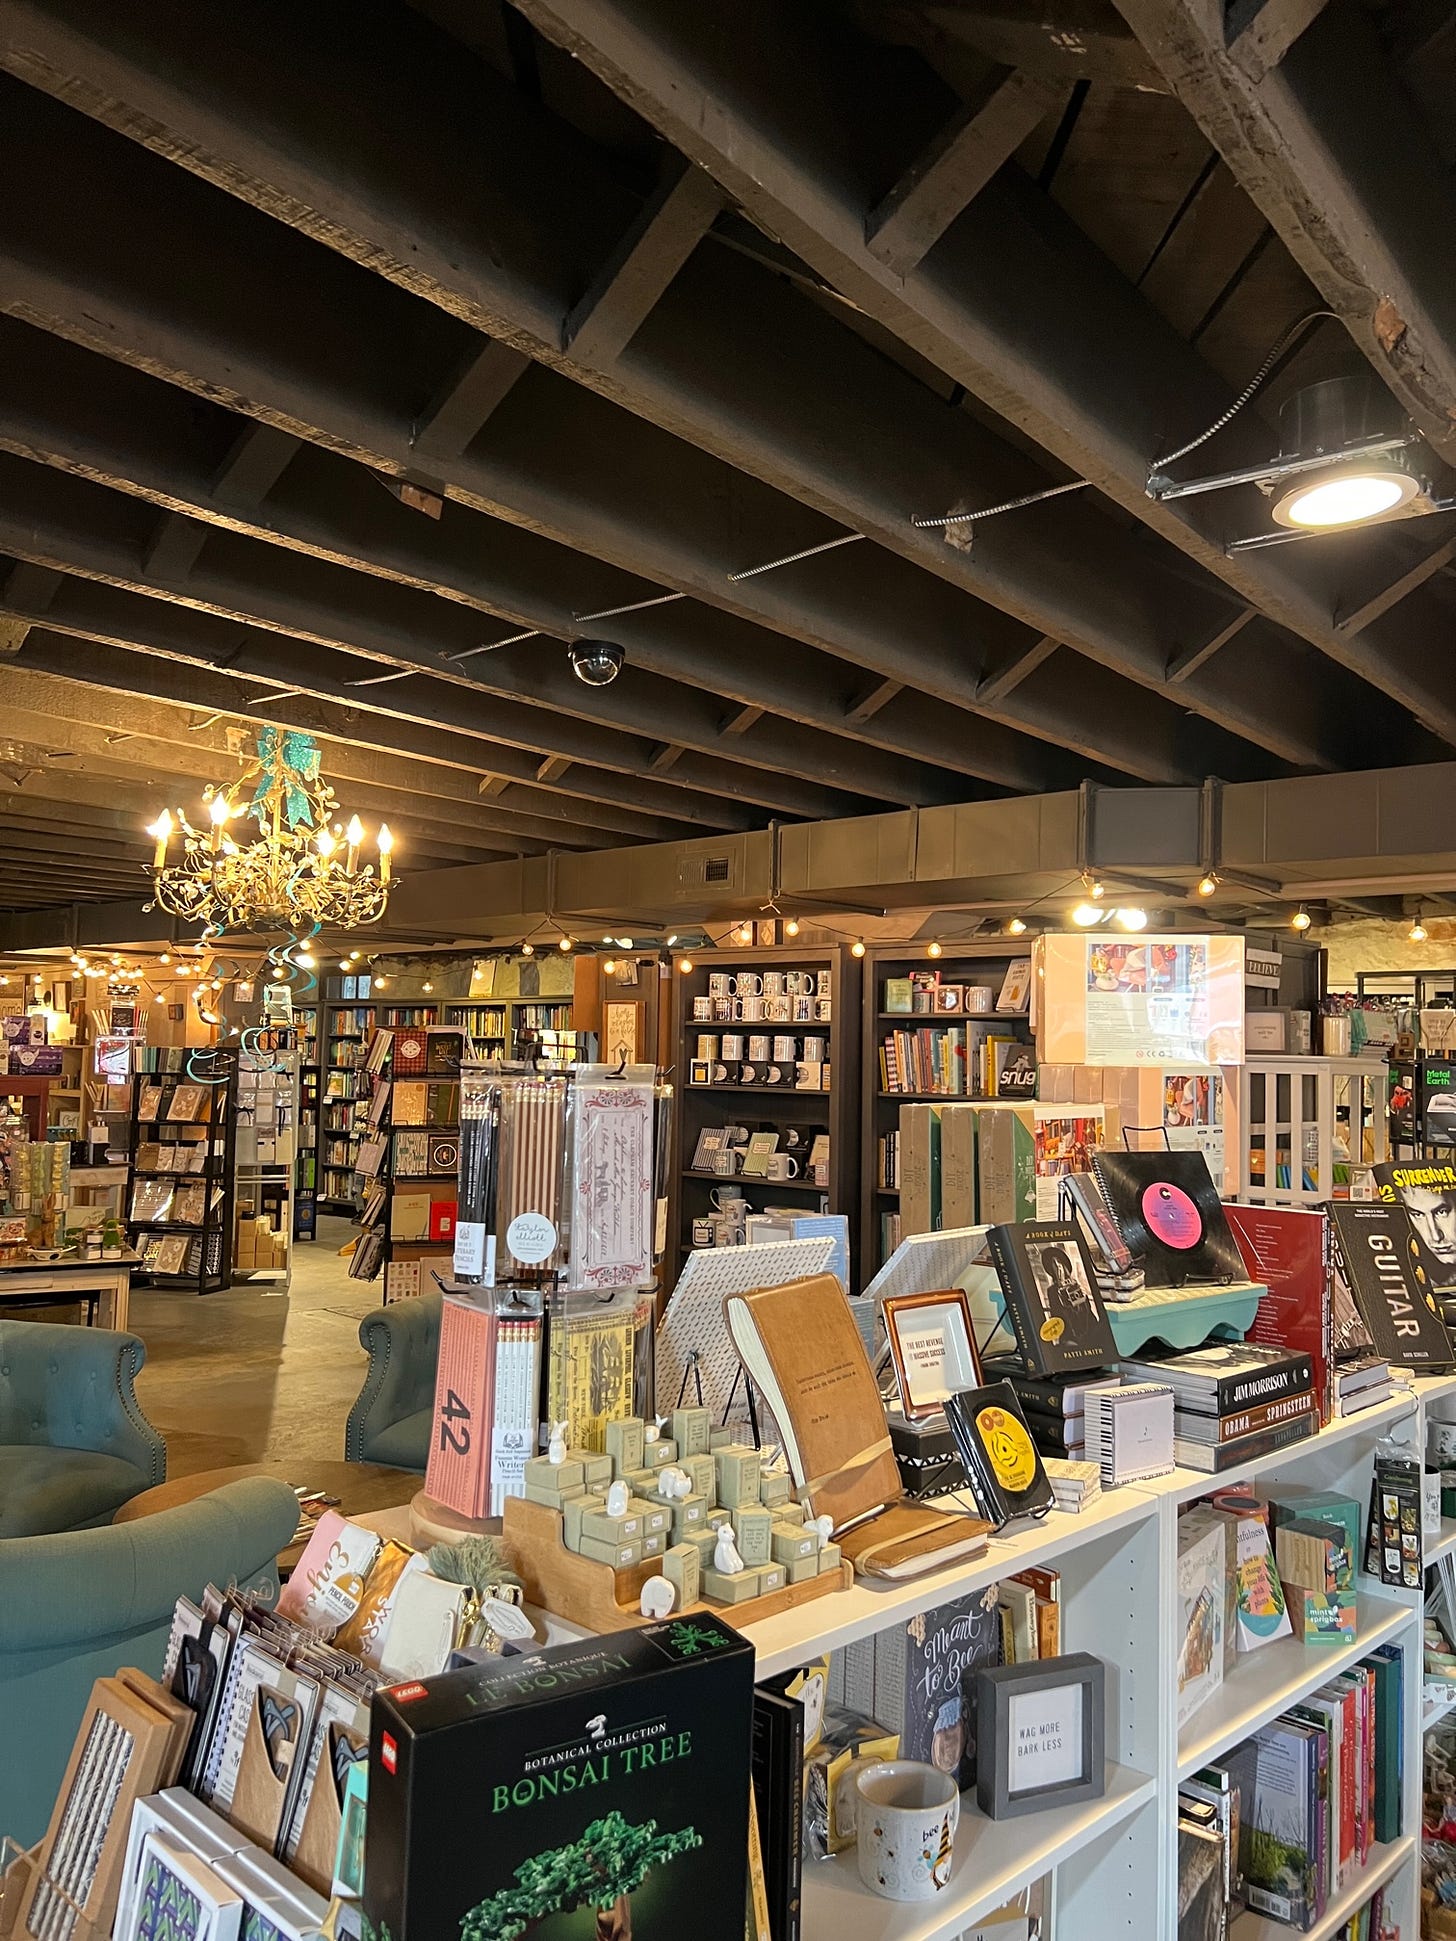 The inside of Sassafras, an underground indie bookstore. There is a big gold chandelier hanging from an open ceiling and many filled bookshelves.